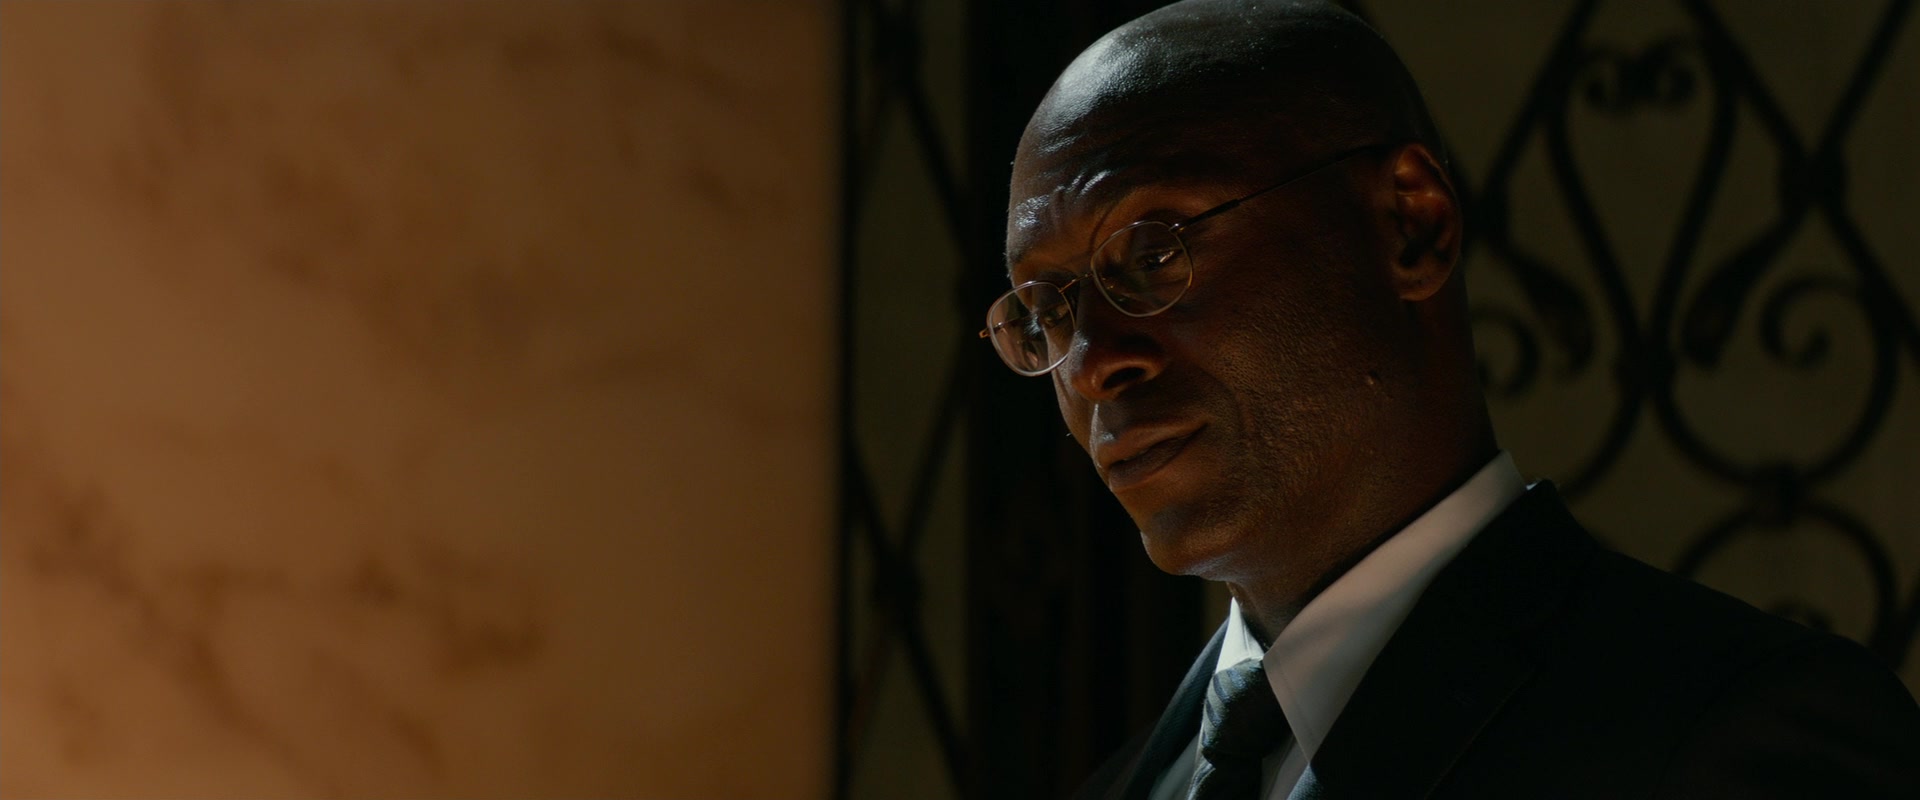 Charon (Lance Reddick) stands watch at the Continental Hotel in John Wick: Chapter 2 (2017), Lionsgate Films